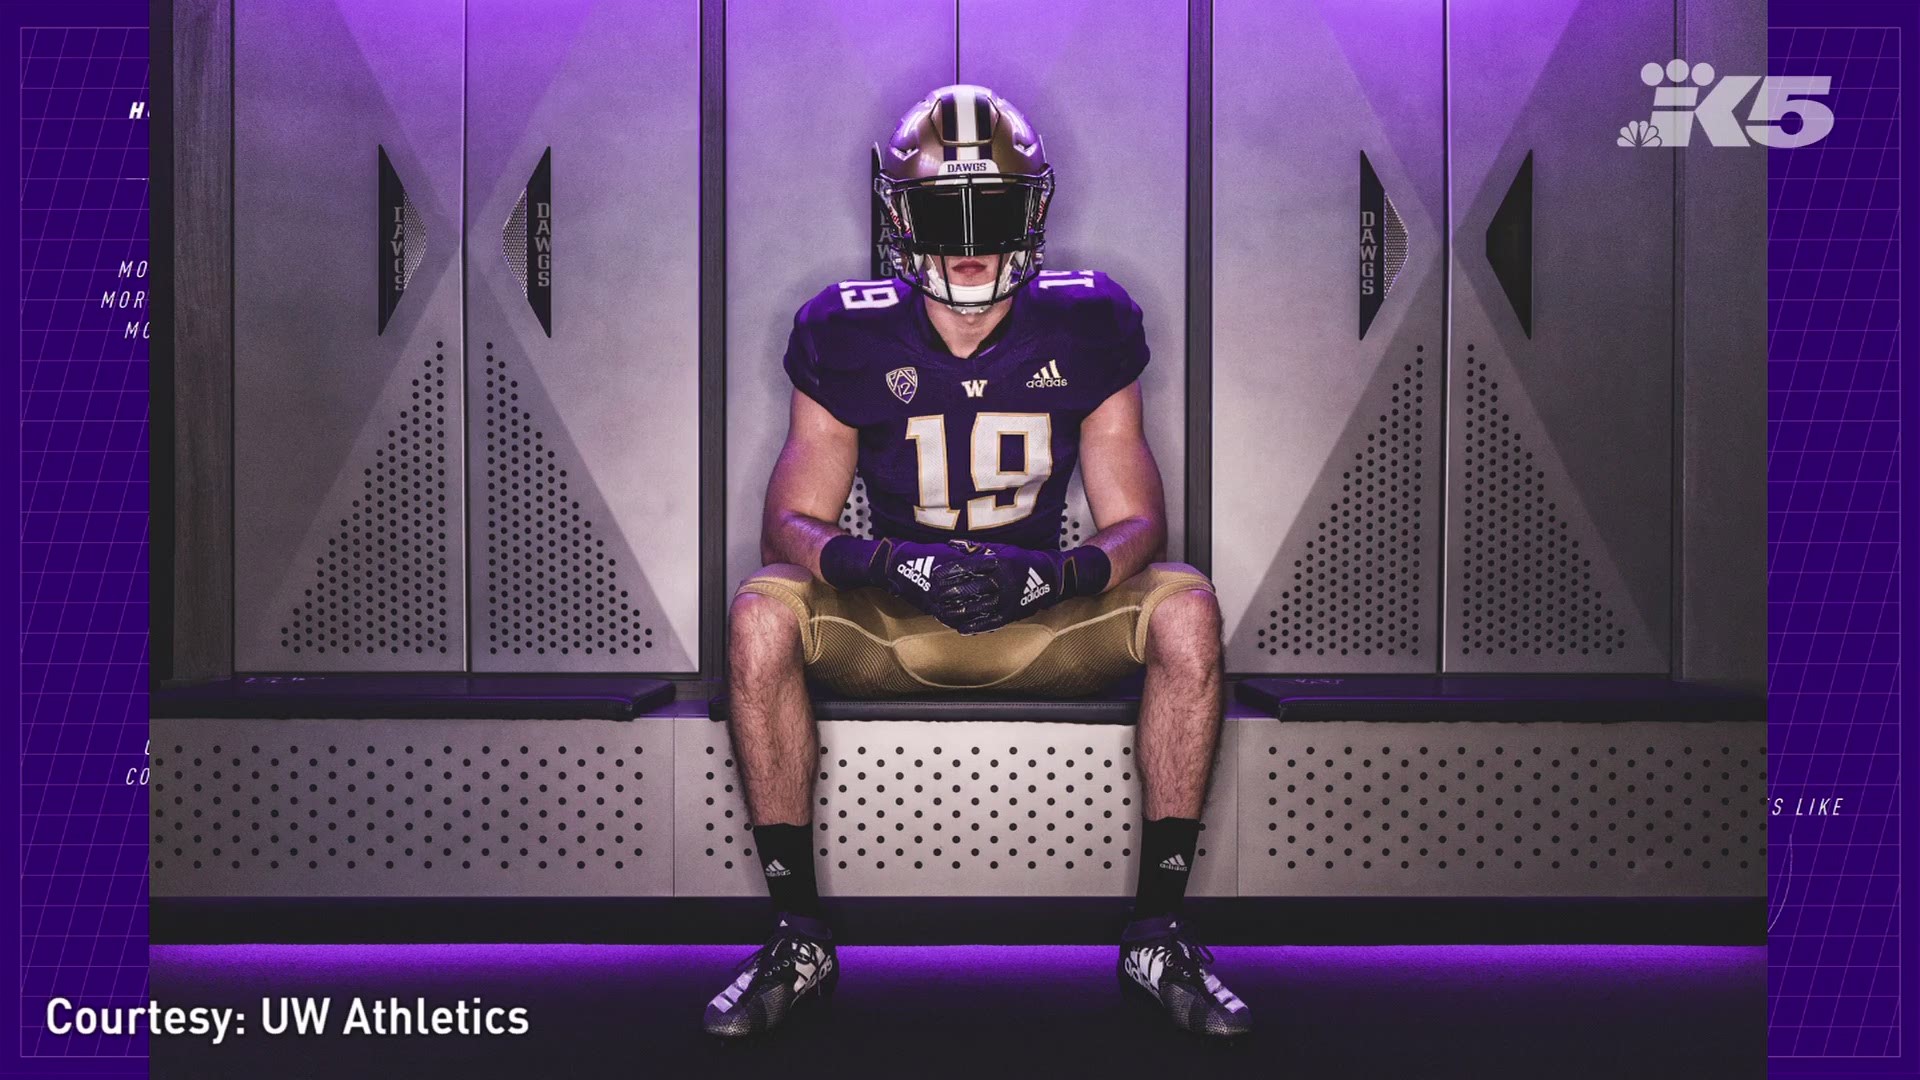 Get a sneak peek at UW football's new uniforms for the 2019 season, which were designed by adidas.